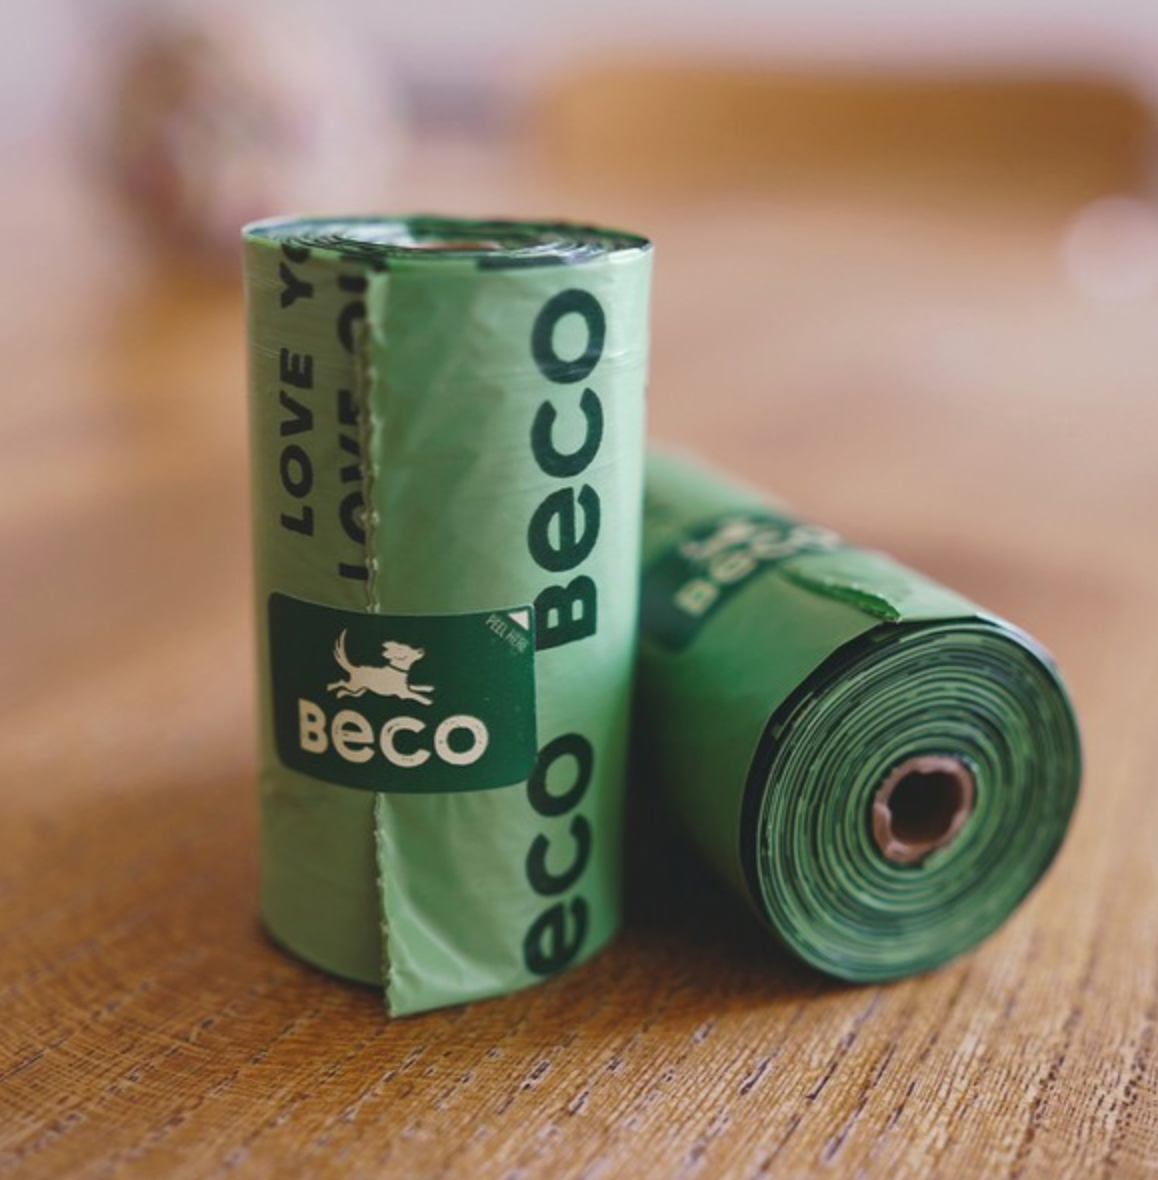 Beco Mint Scented Compostable Poop Bags (120 Bags)